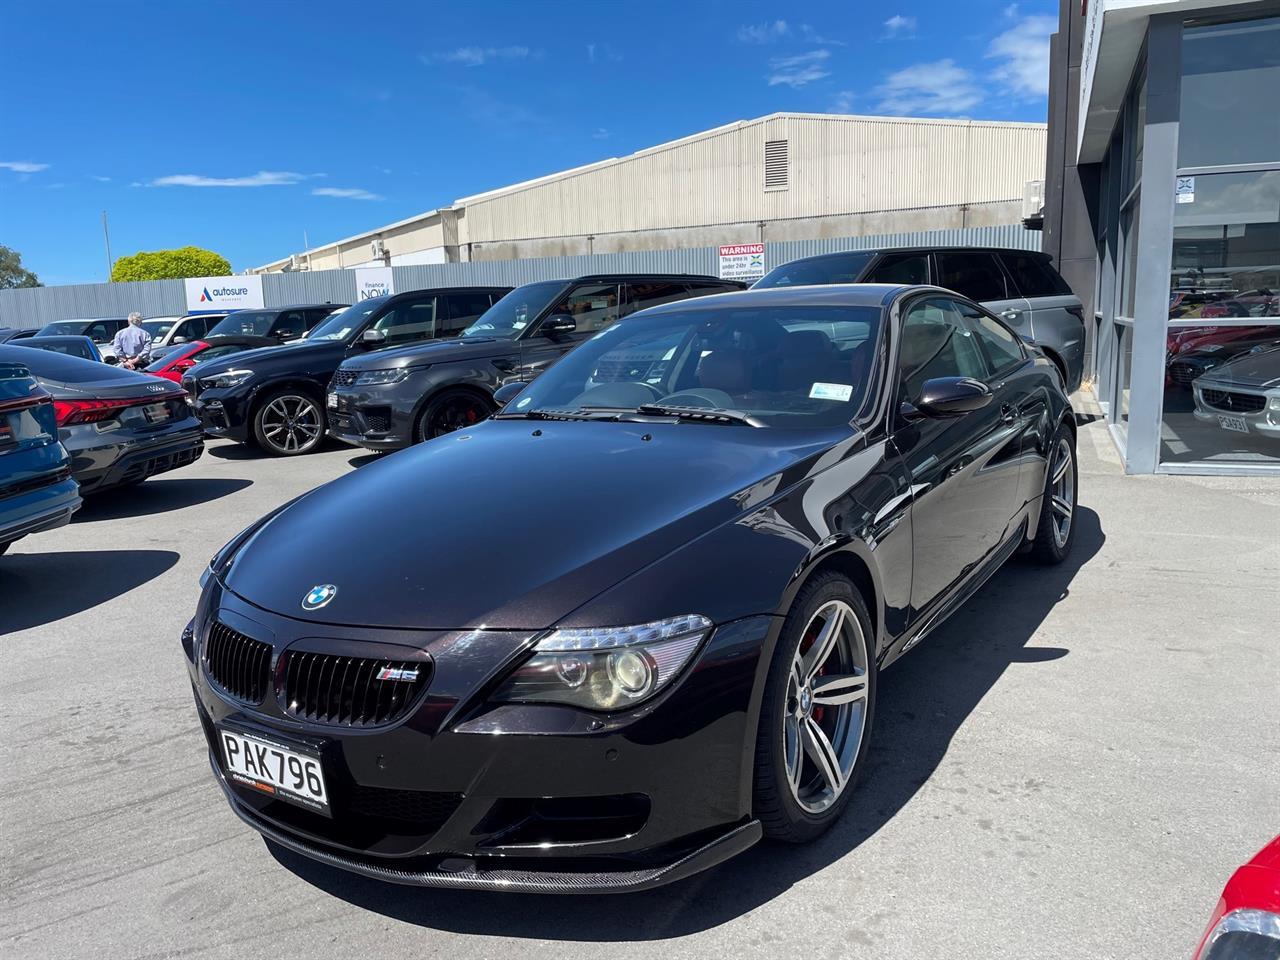 image-2, 2006 BMW M6 5.0 V10 SMG Coupe Carbon Package at Christchurch